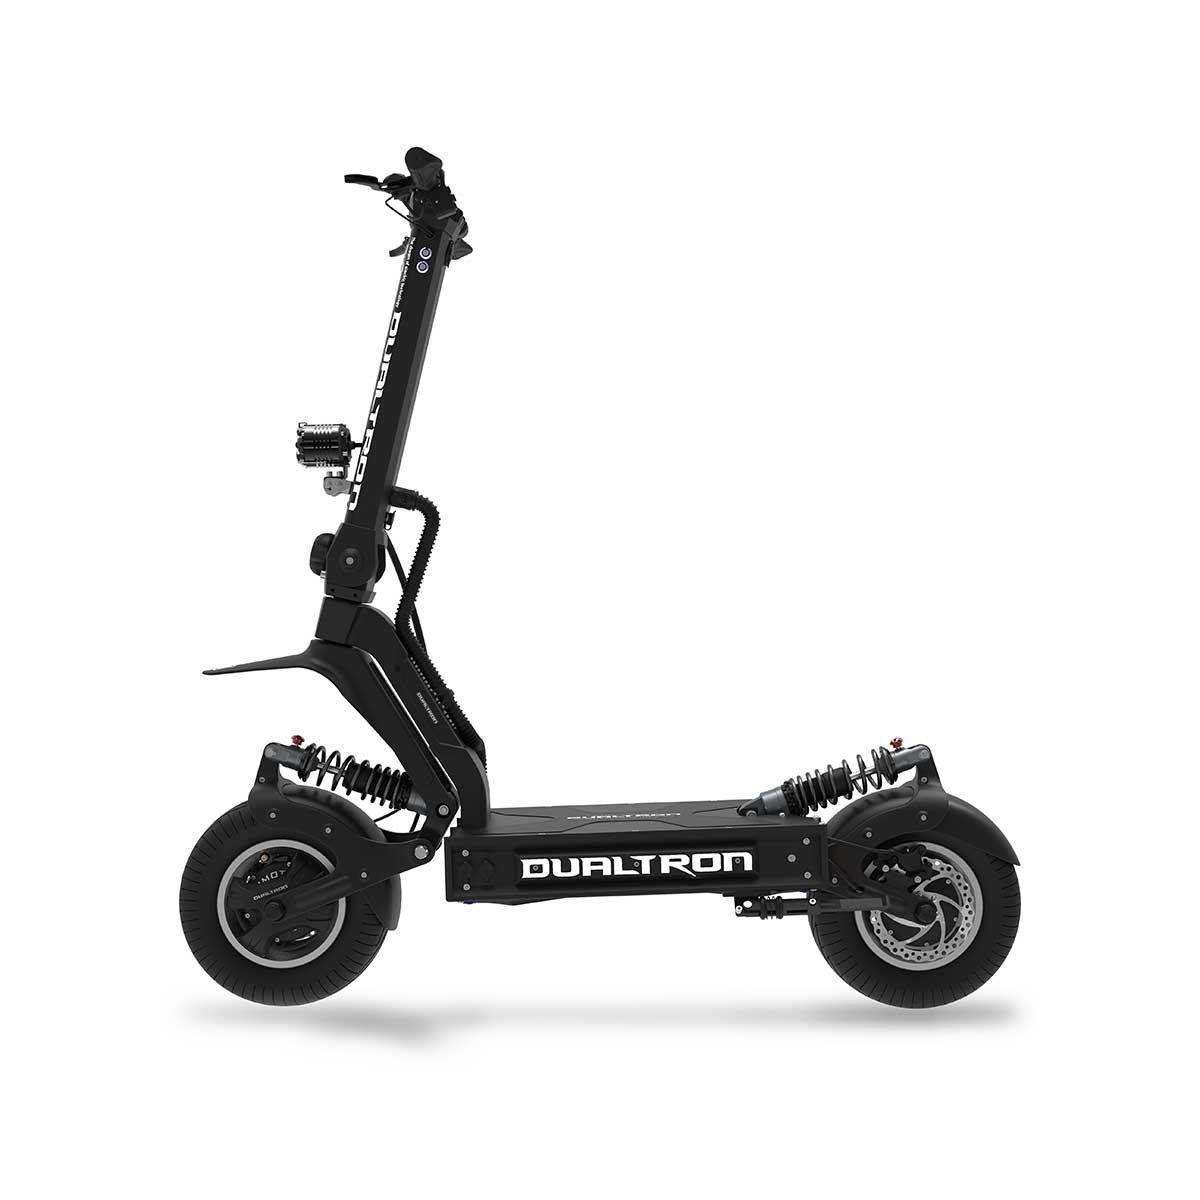 Side view of Dualtron X2 electric scooter.